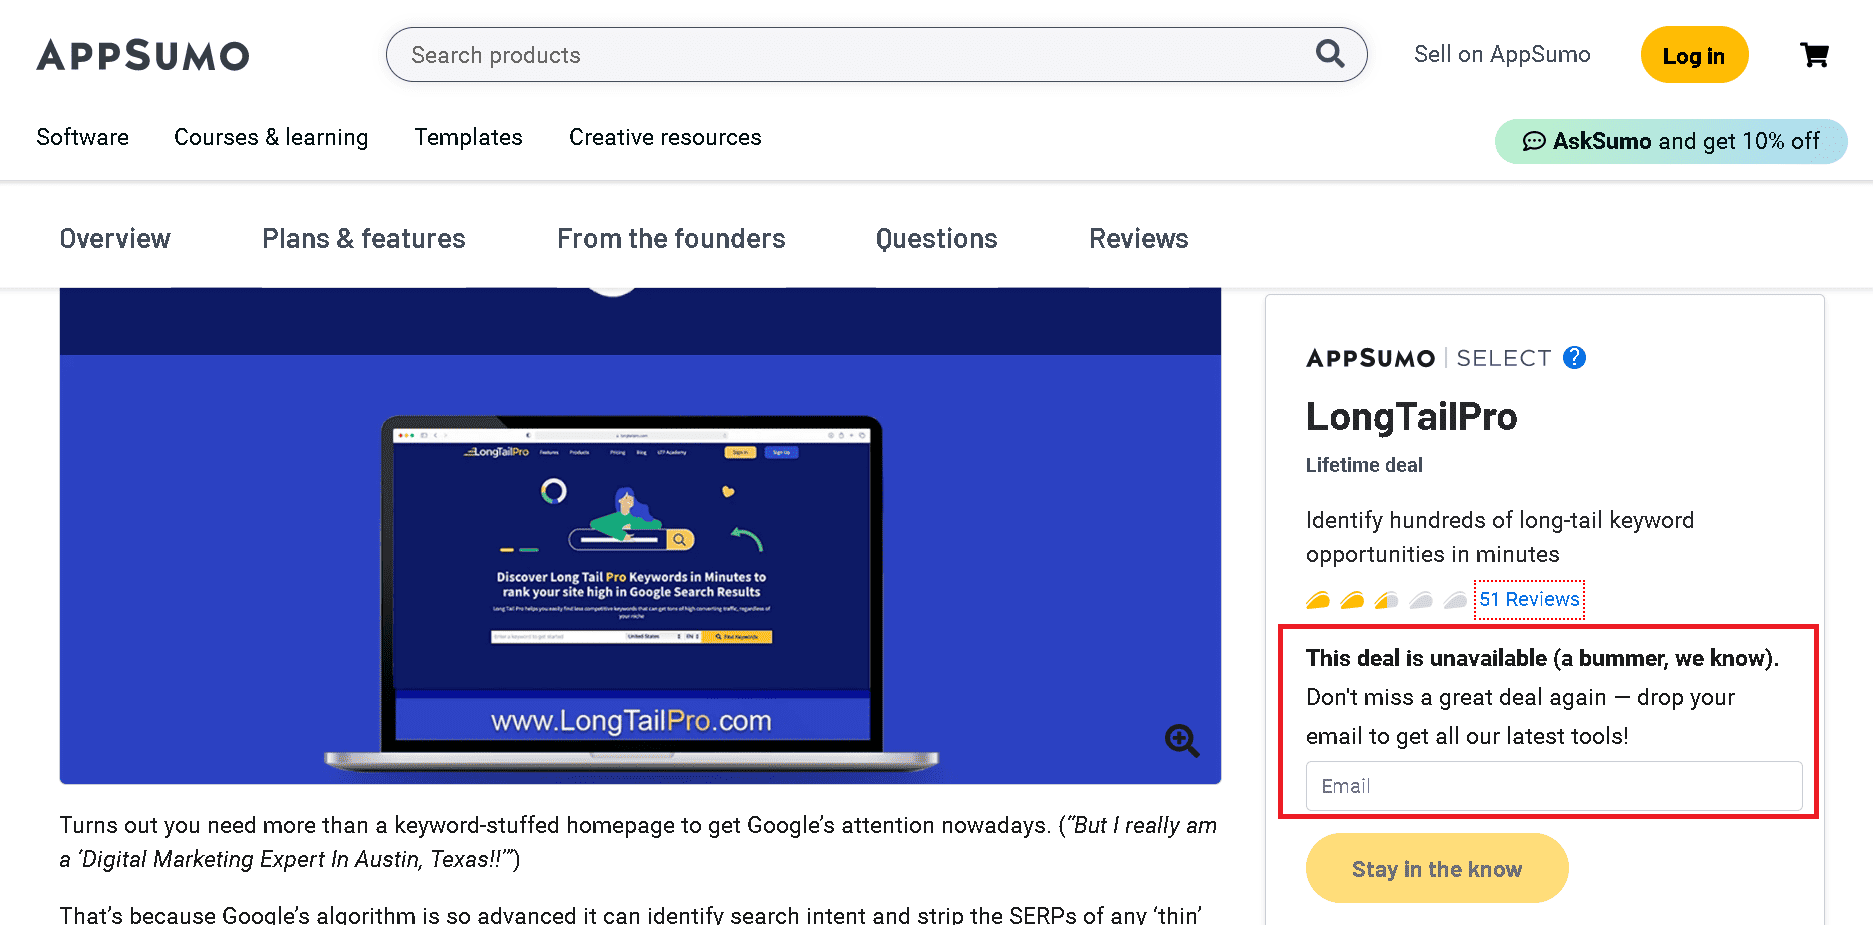 Long Tail Pro AppSumo deal doesn't exist